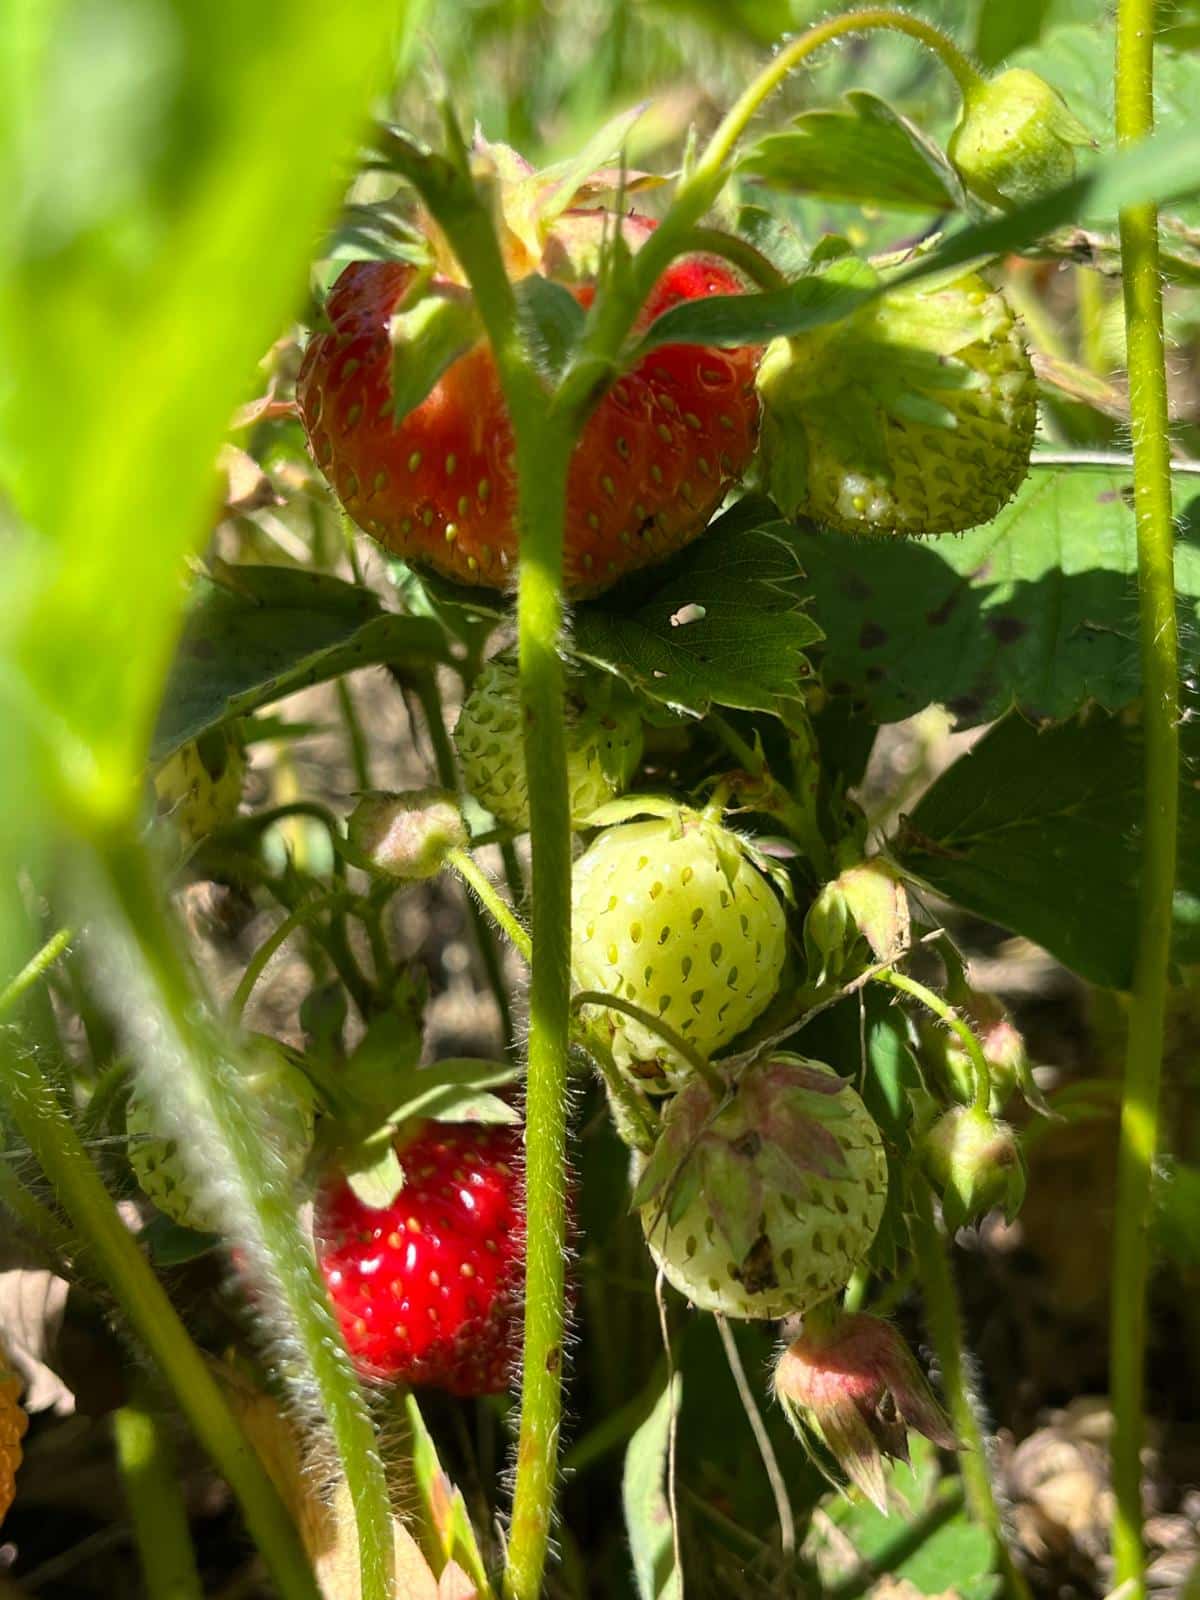 Strawberries in the patch in various stages of ripening